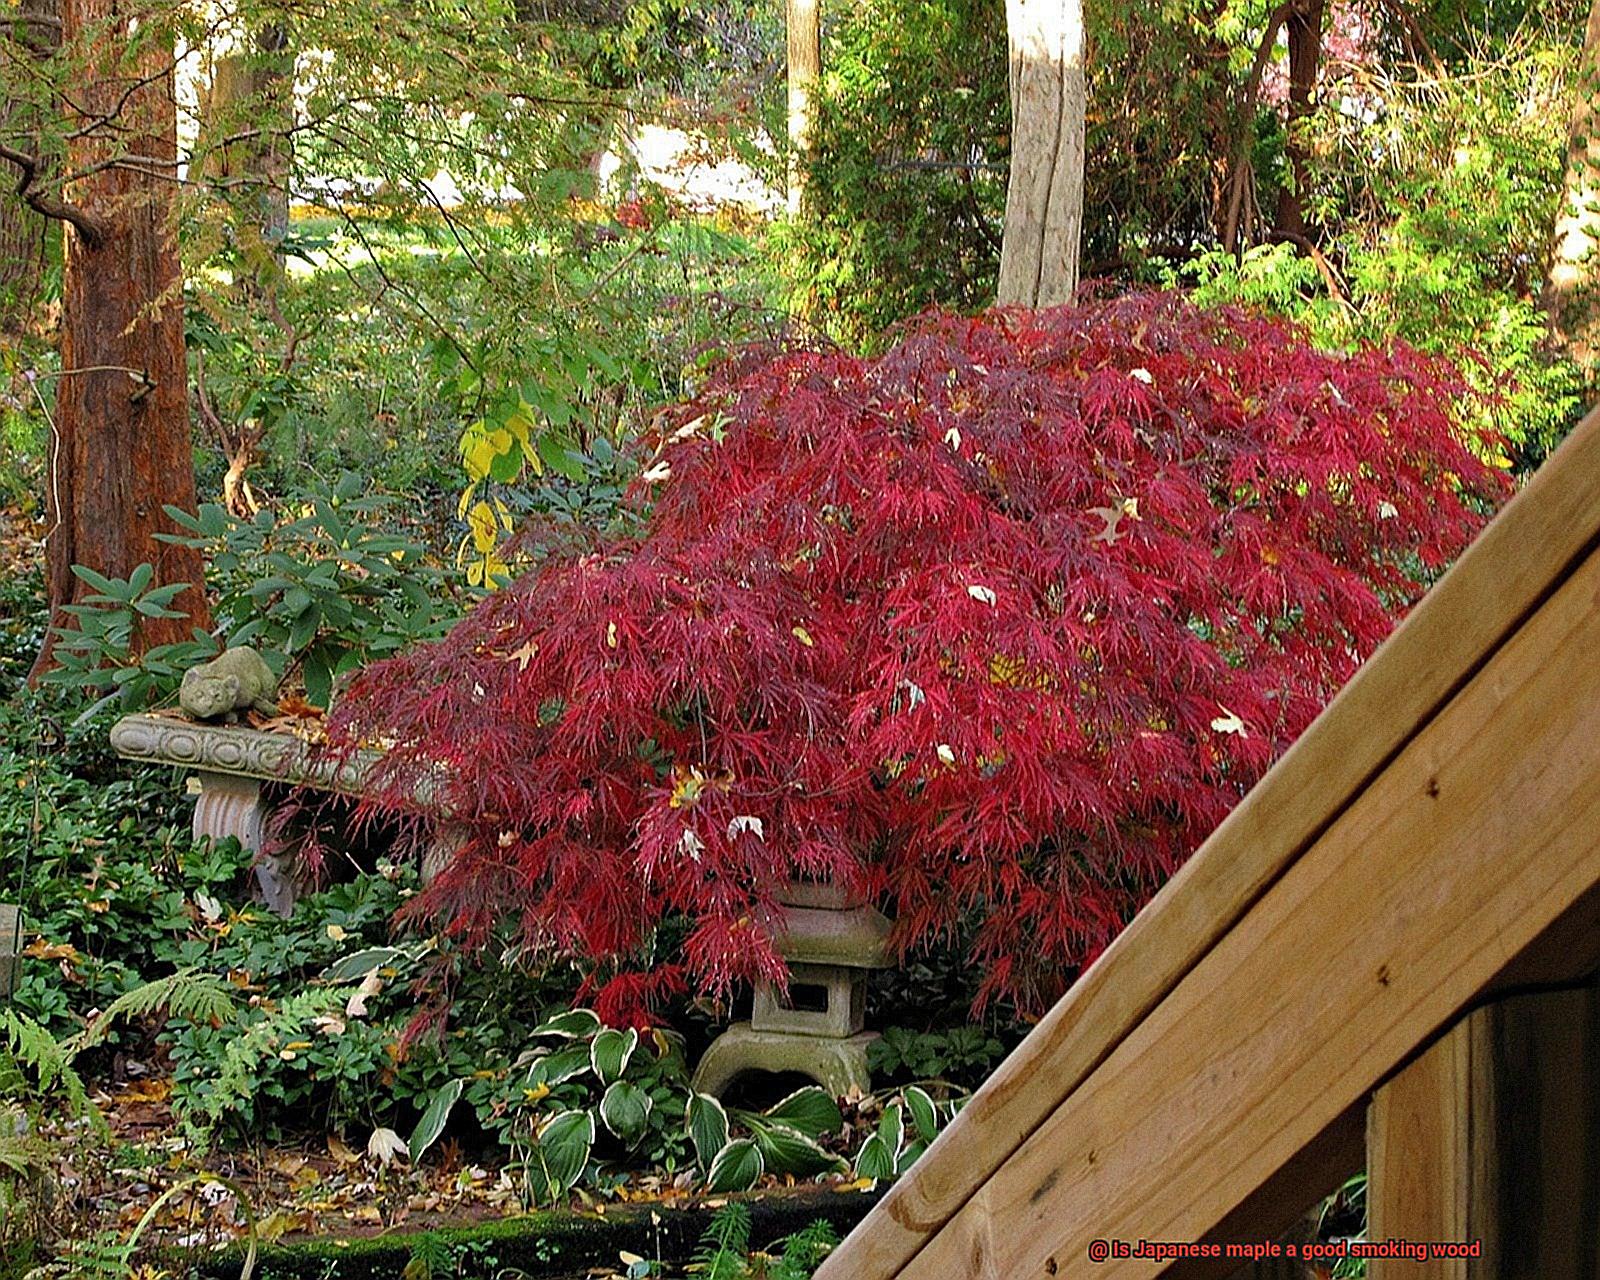 Is Japanese maple a good smoking wood-4